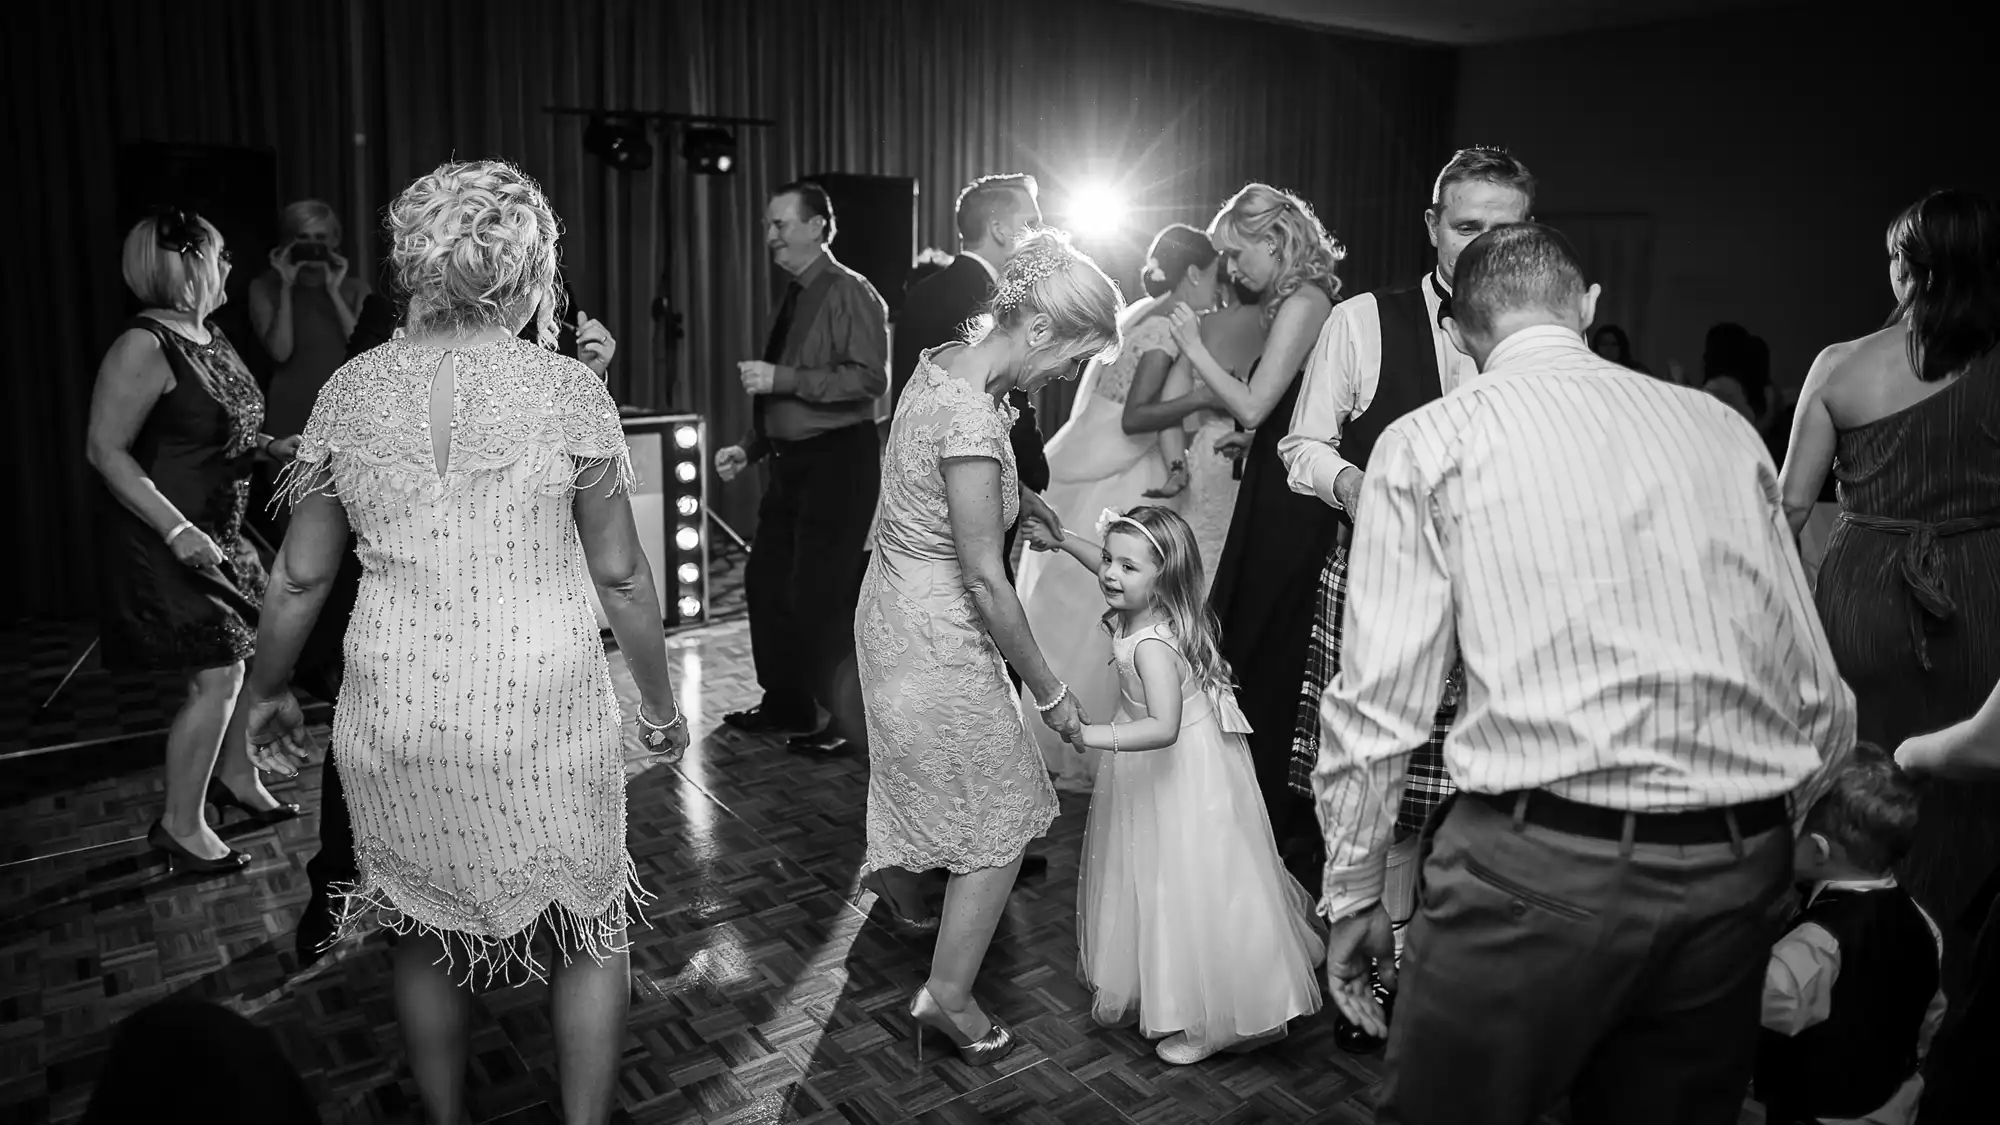 Black and white image of people dancing and socializing at an indoor party, with a little girl interacting with adults under a spotlight.